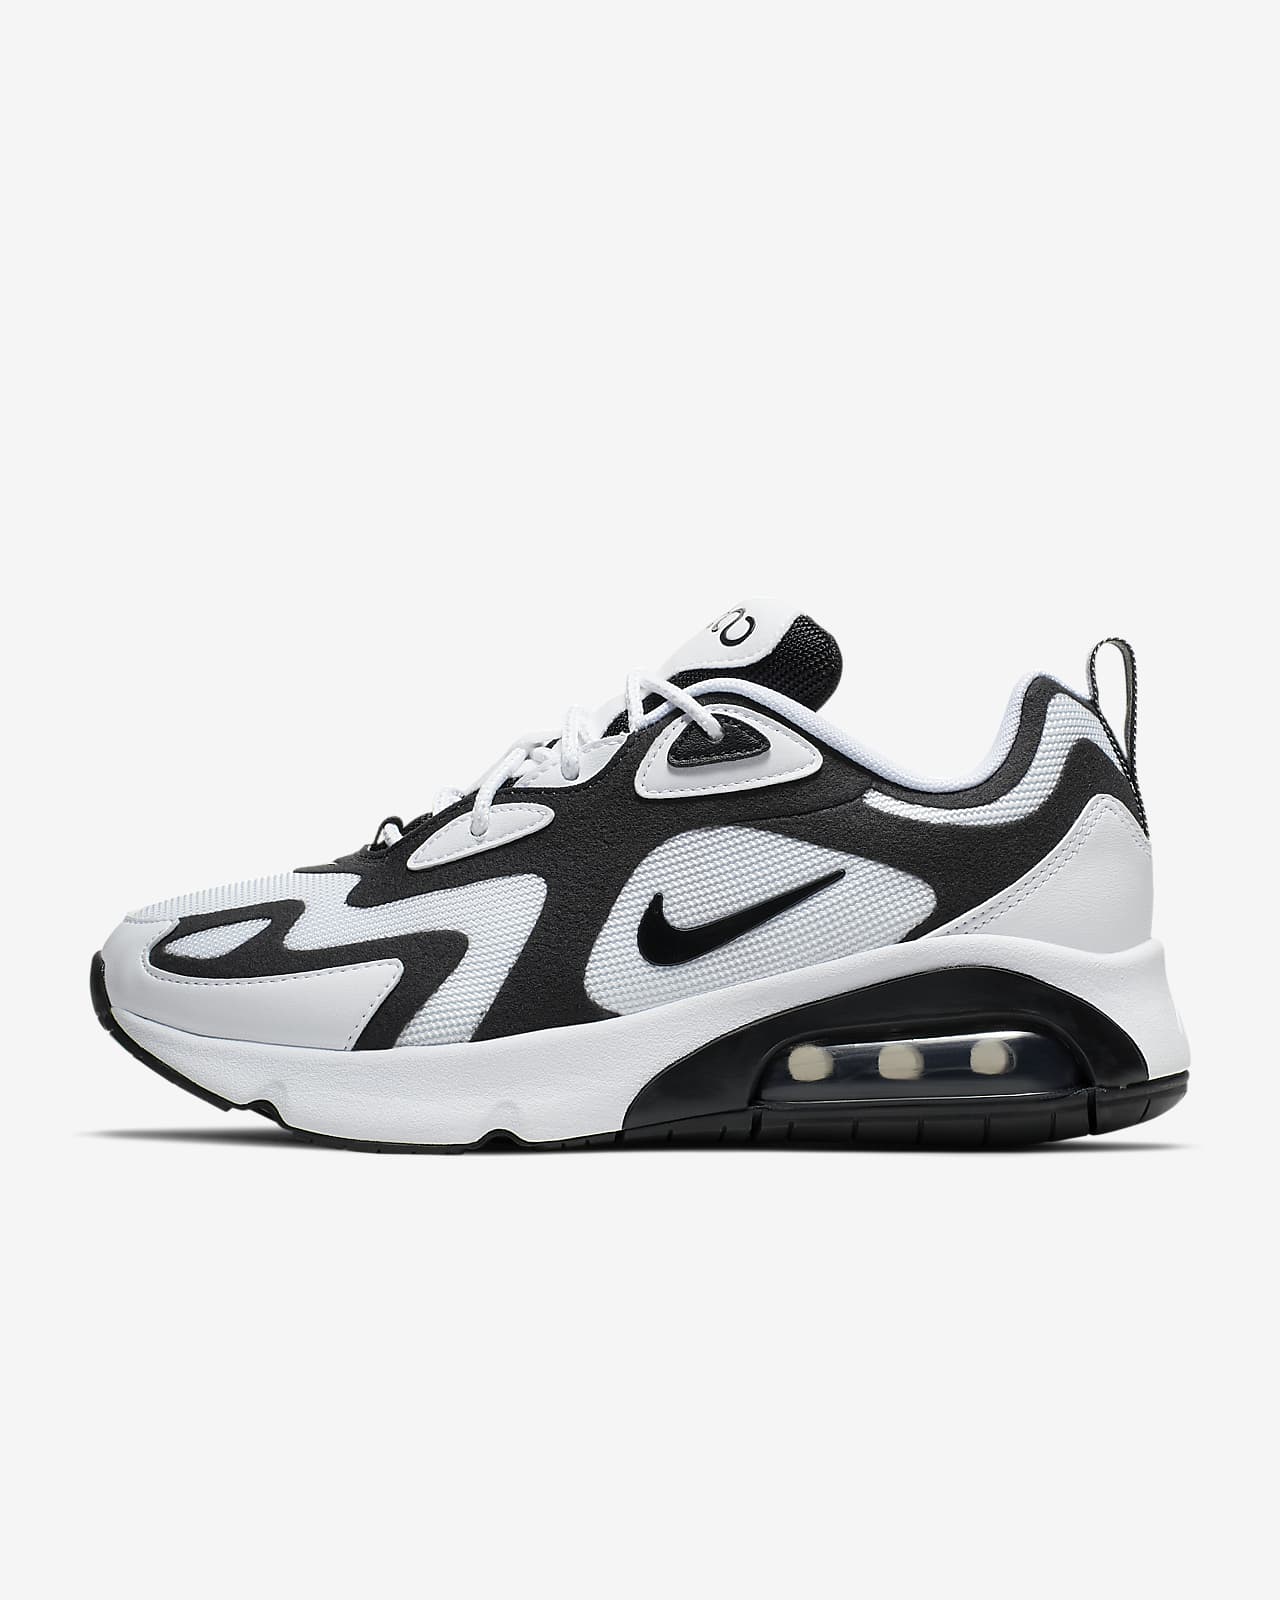 air max 200 new release